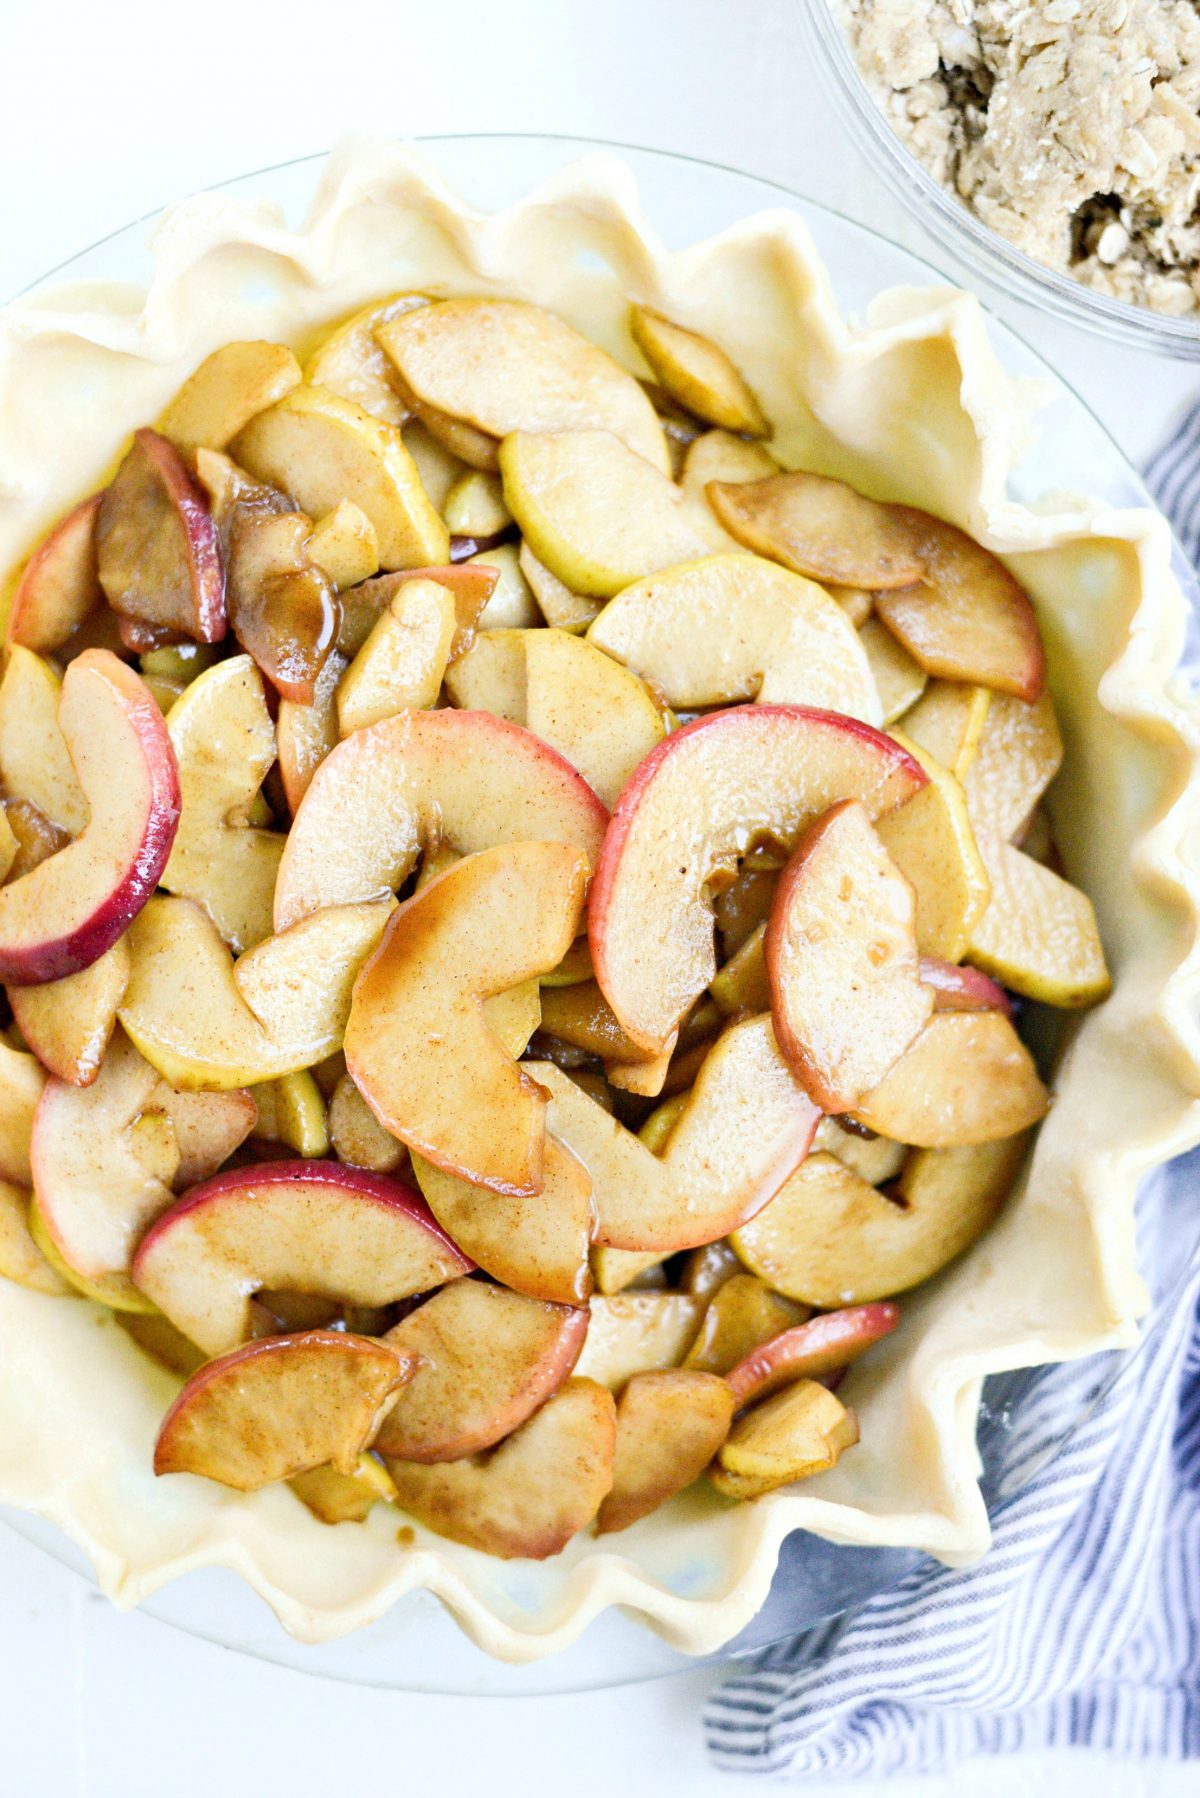 add apples to uncooked pie dough